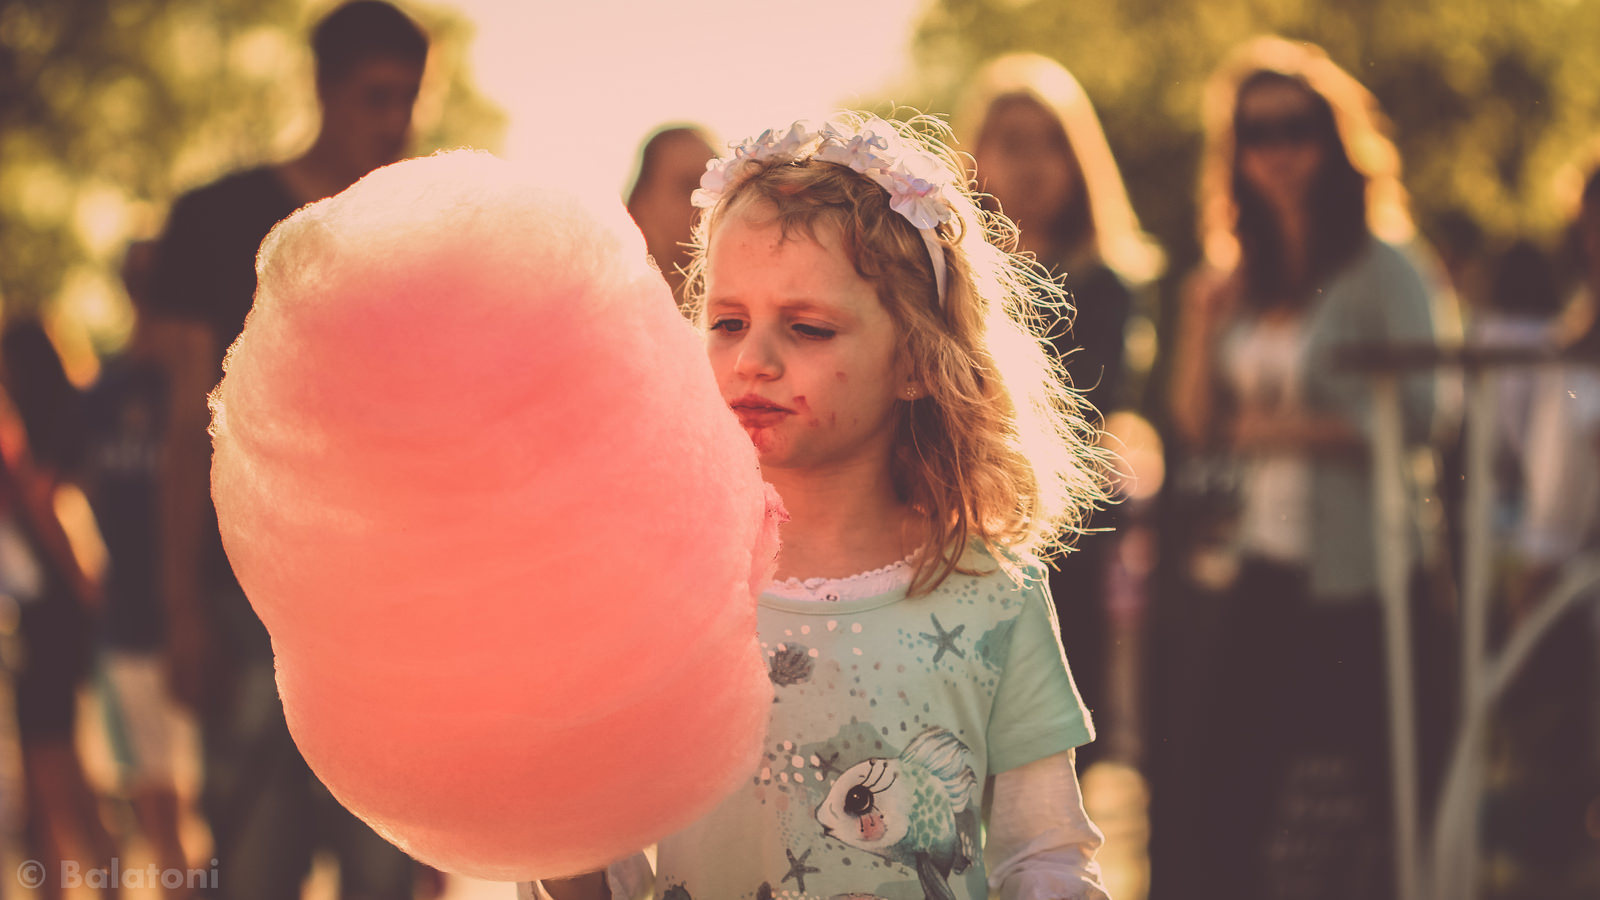 Cotton candy was actually invented by a dentist -- after all, it's a great way to stay in business.